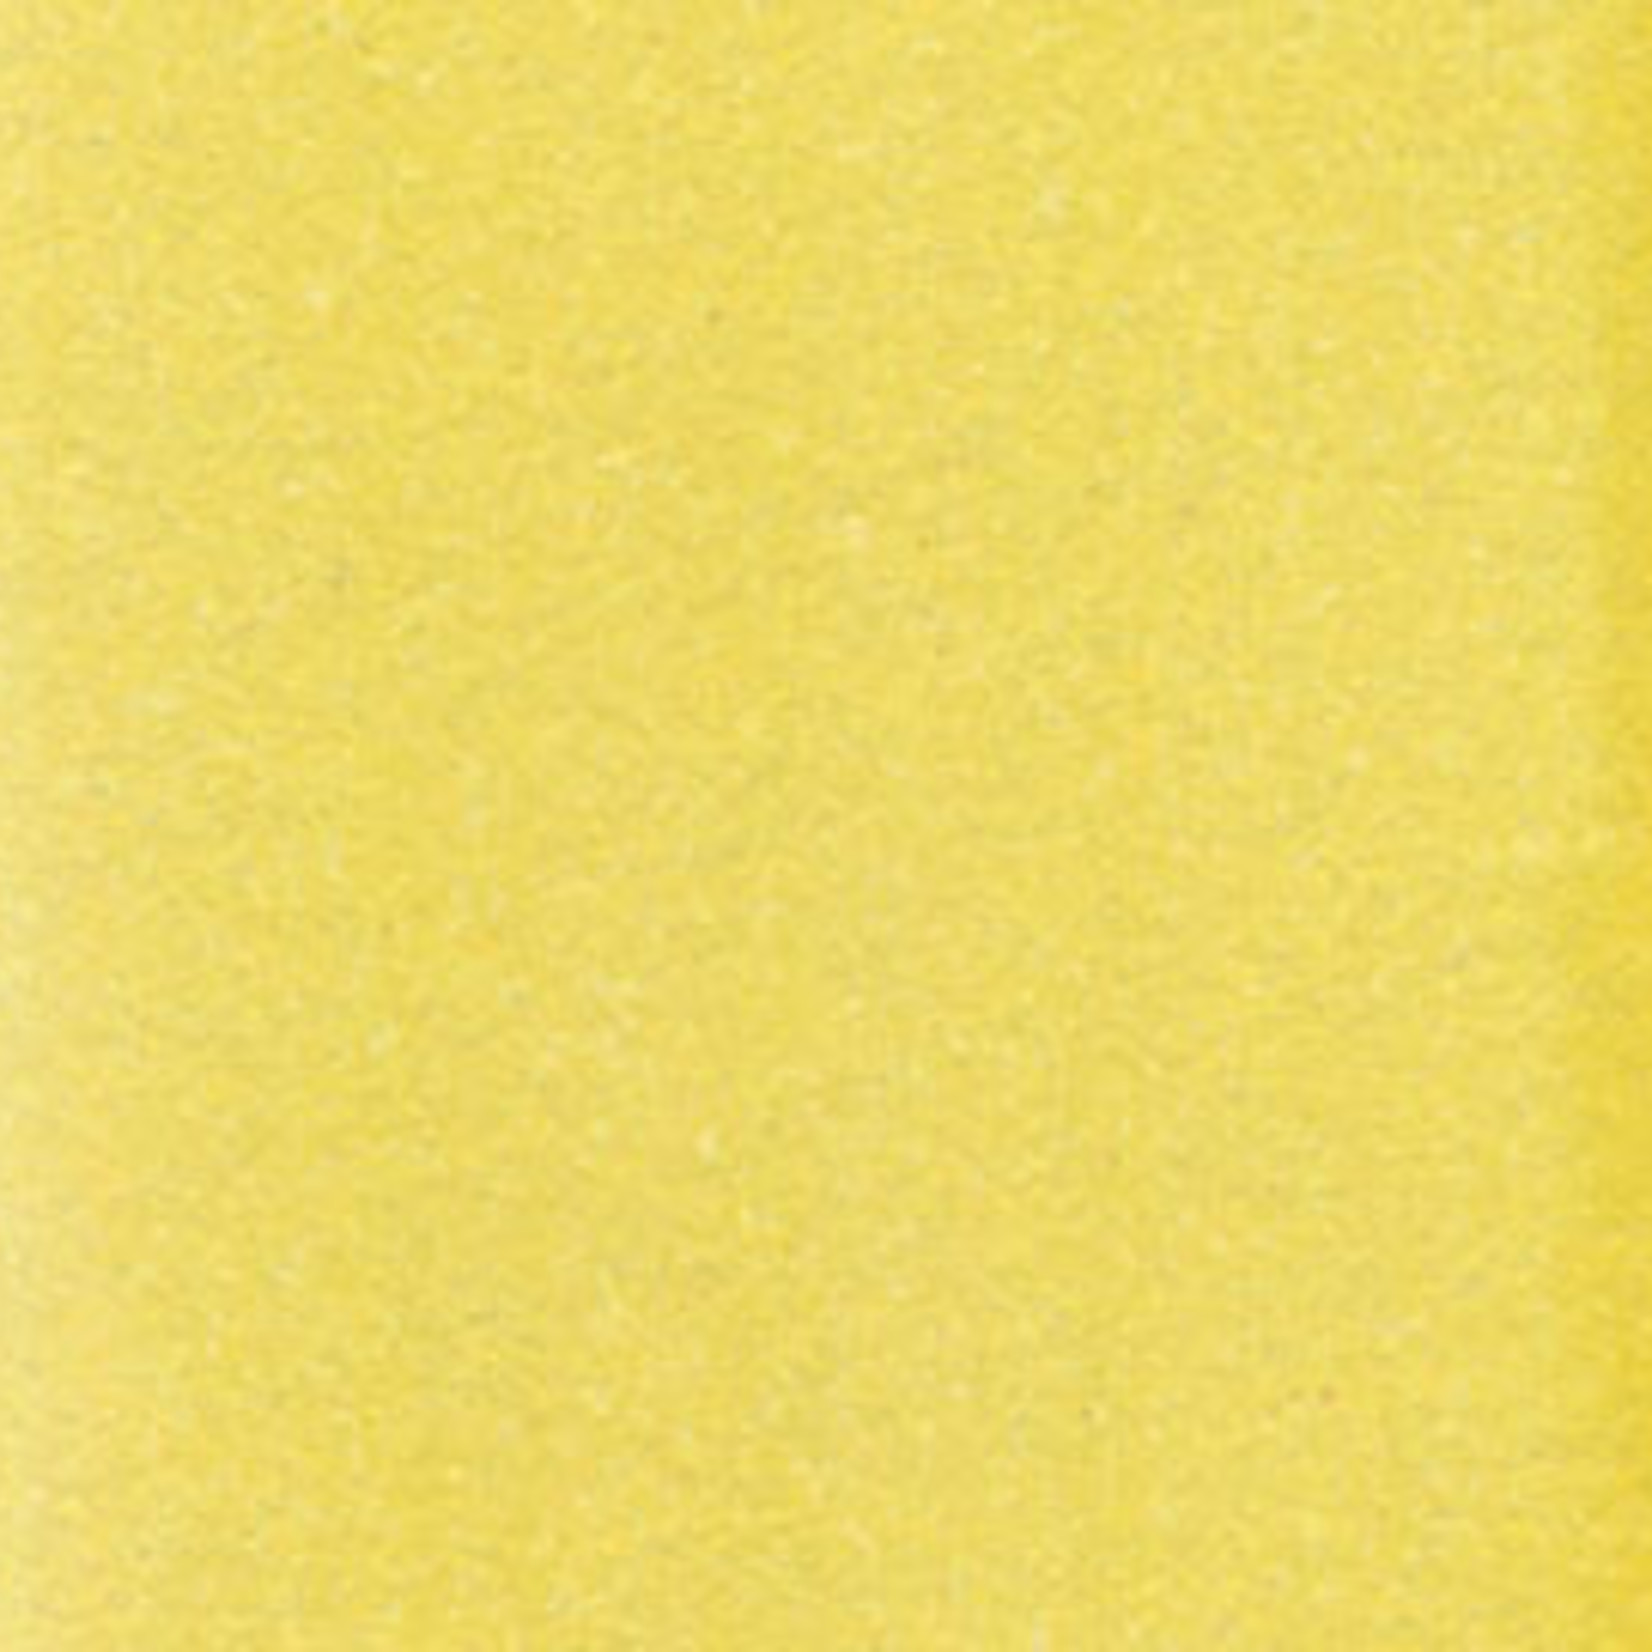 COPIC COPIC SKETCH YG00 MIMOSA YELLOW